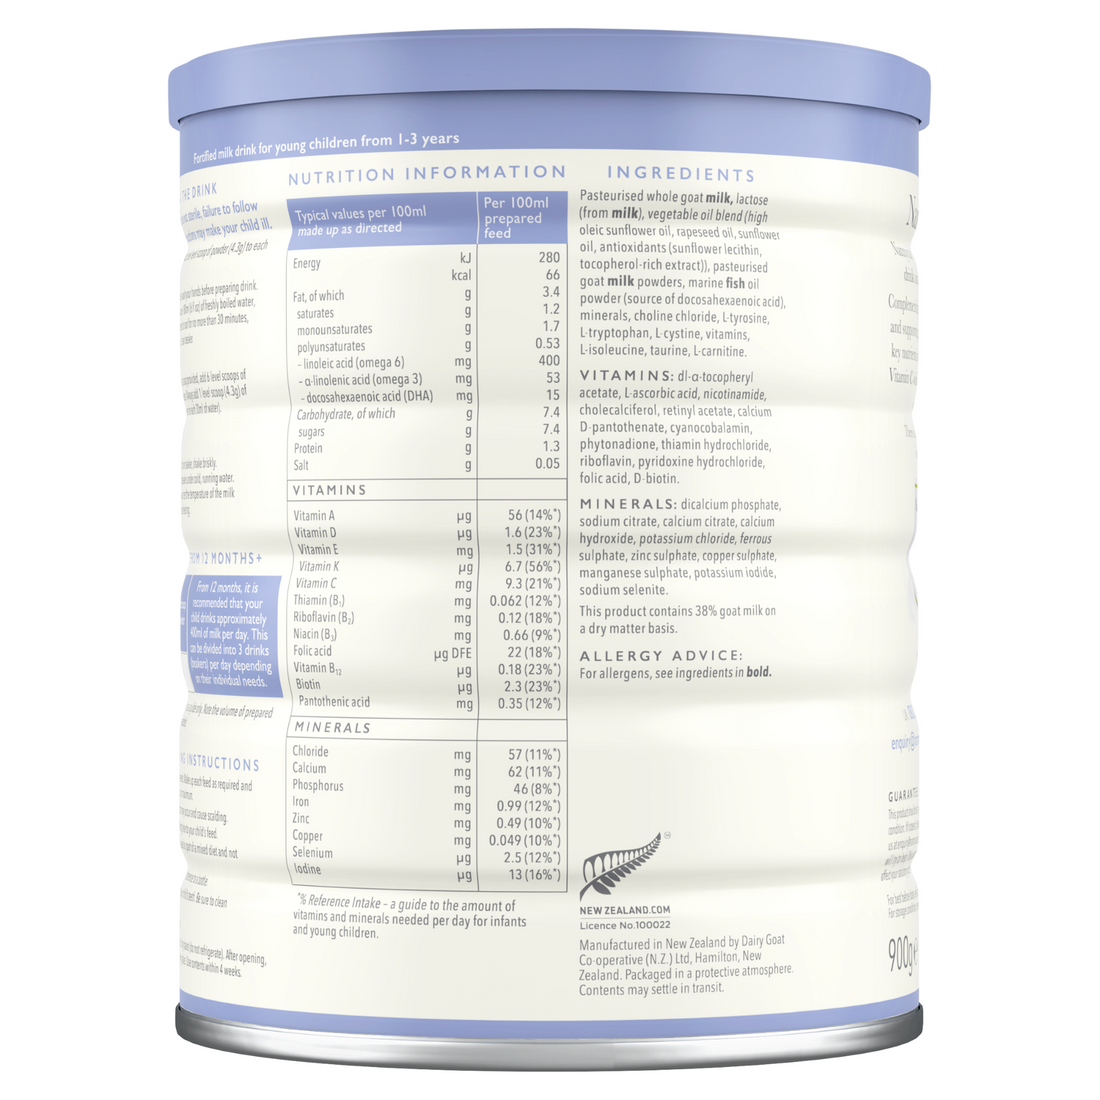 NANNYCare Stage 3 Growing Up Goat Milk Formula (900g) - The Best From  Europe and Japan